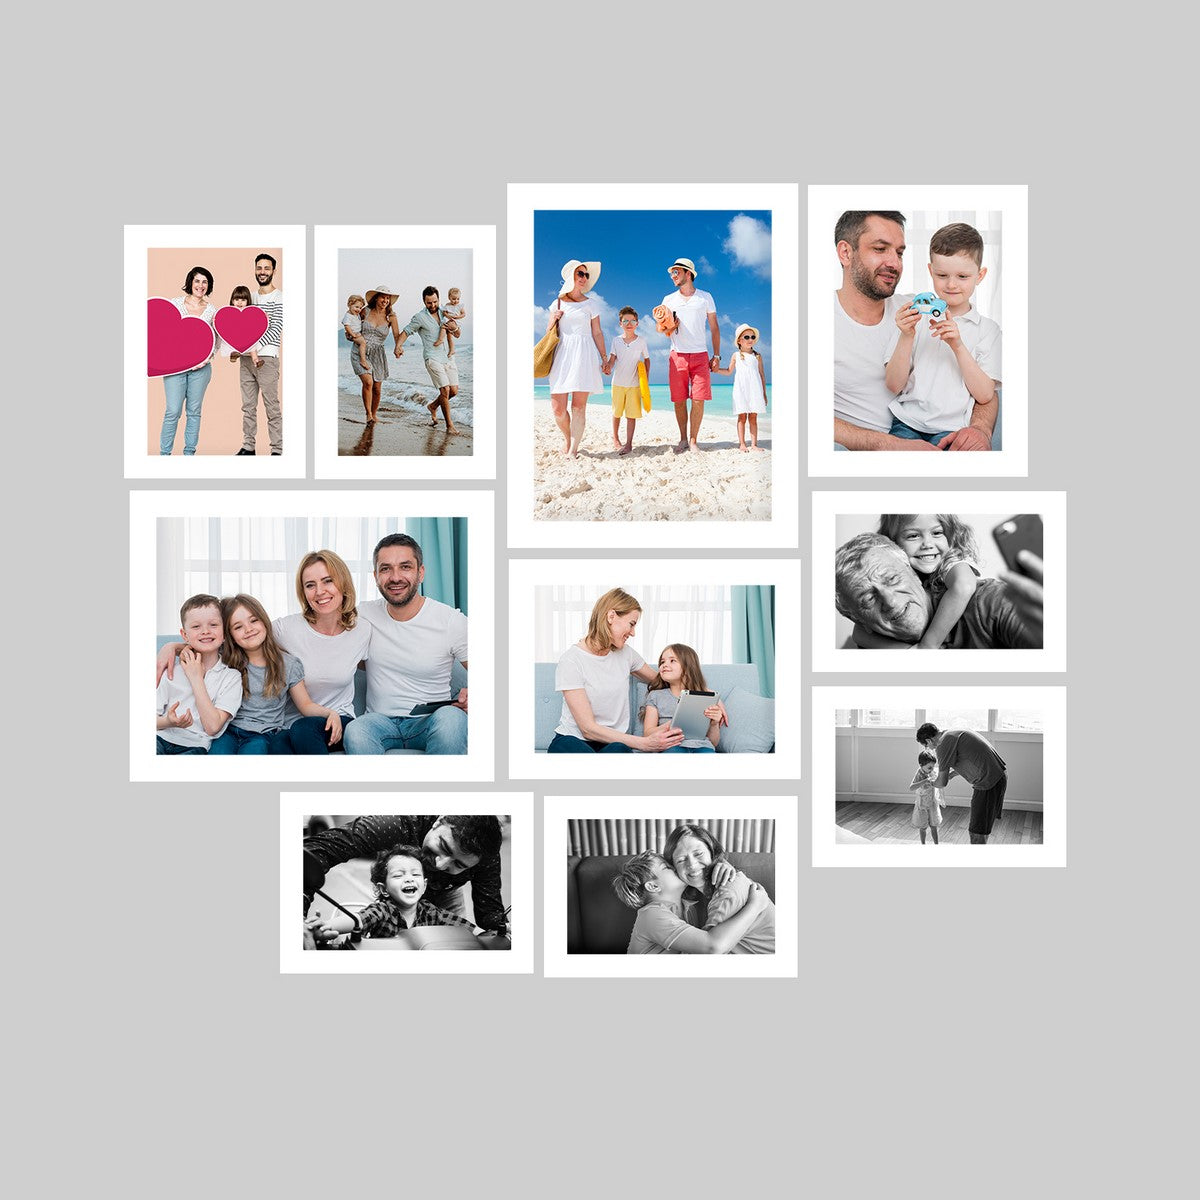 Memory Wall Collage Photo Frame - Set of 10 Photo Frames for 6 Photos of 5"x7", 2 Photos of 6"x8" and 2 Photos of 8"x10"